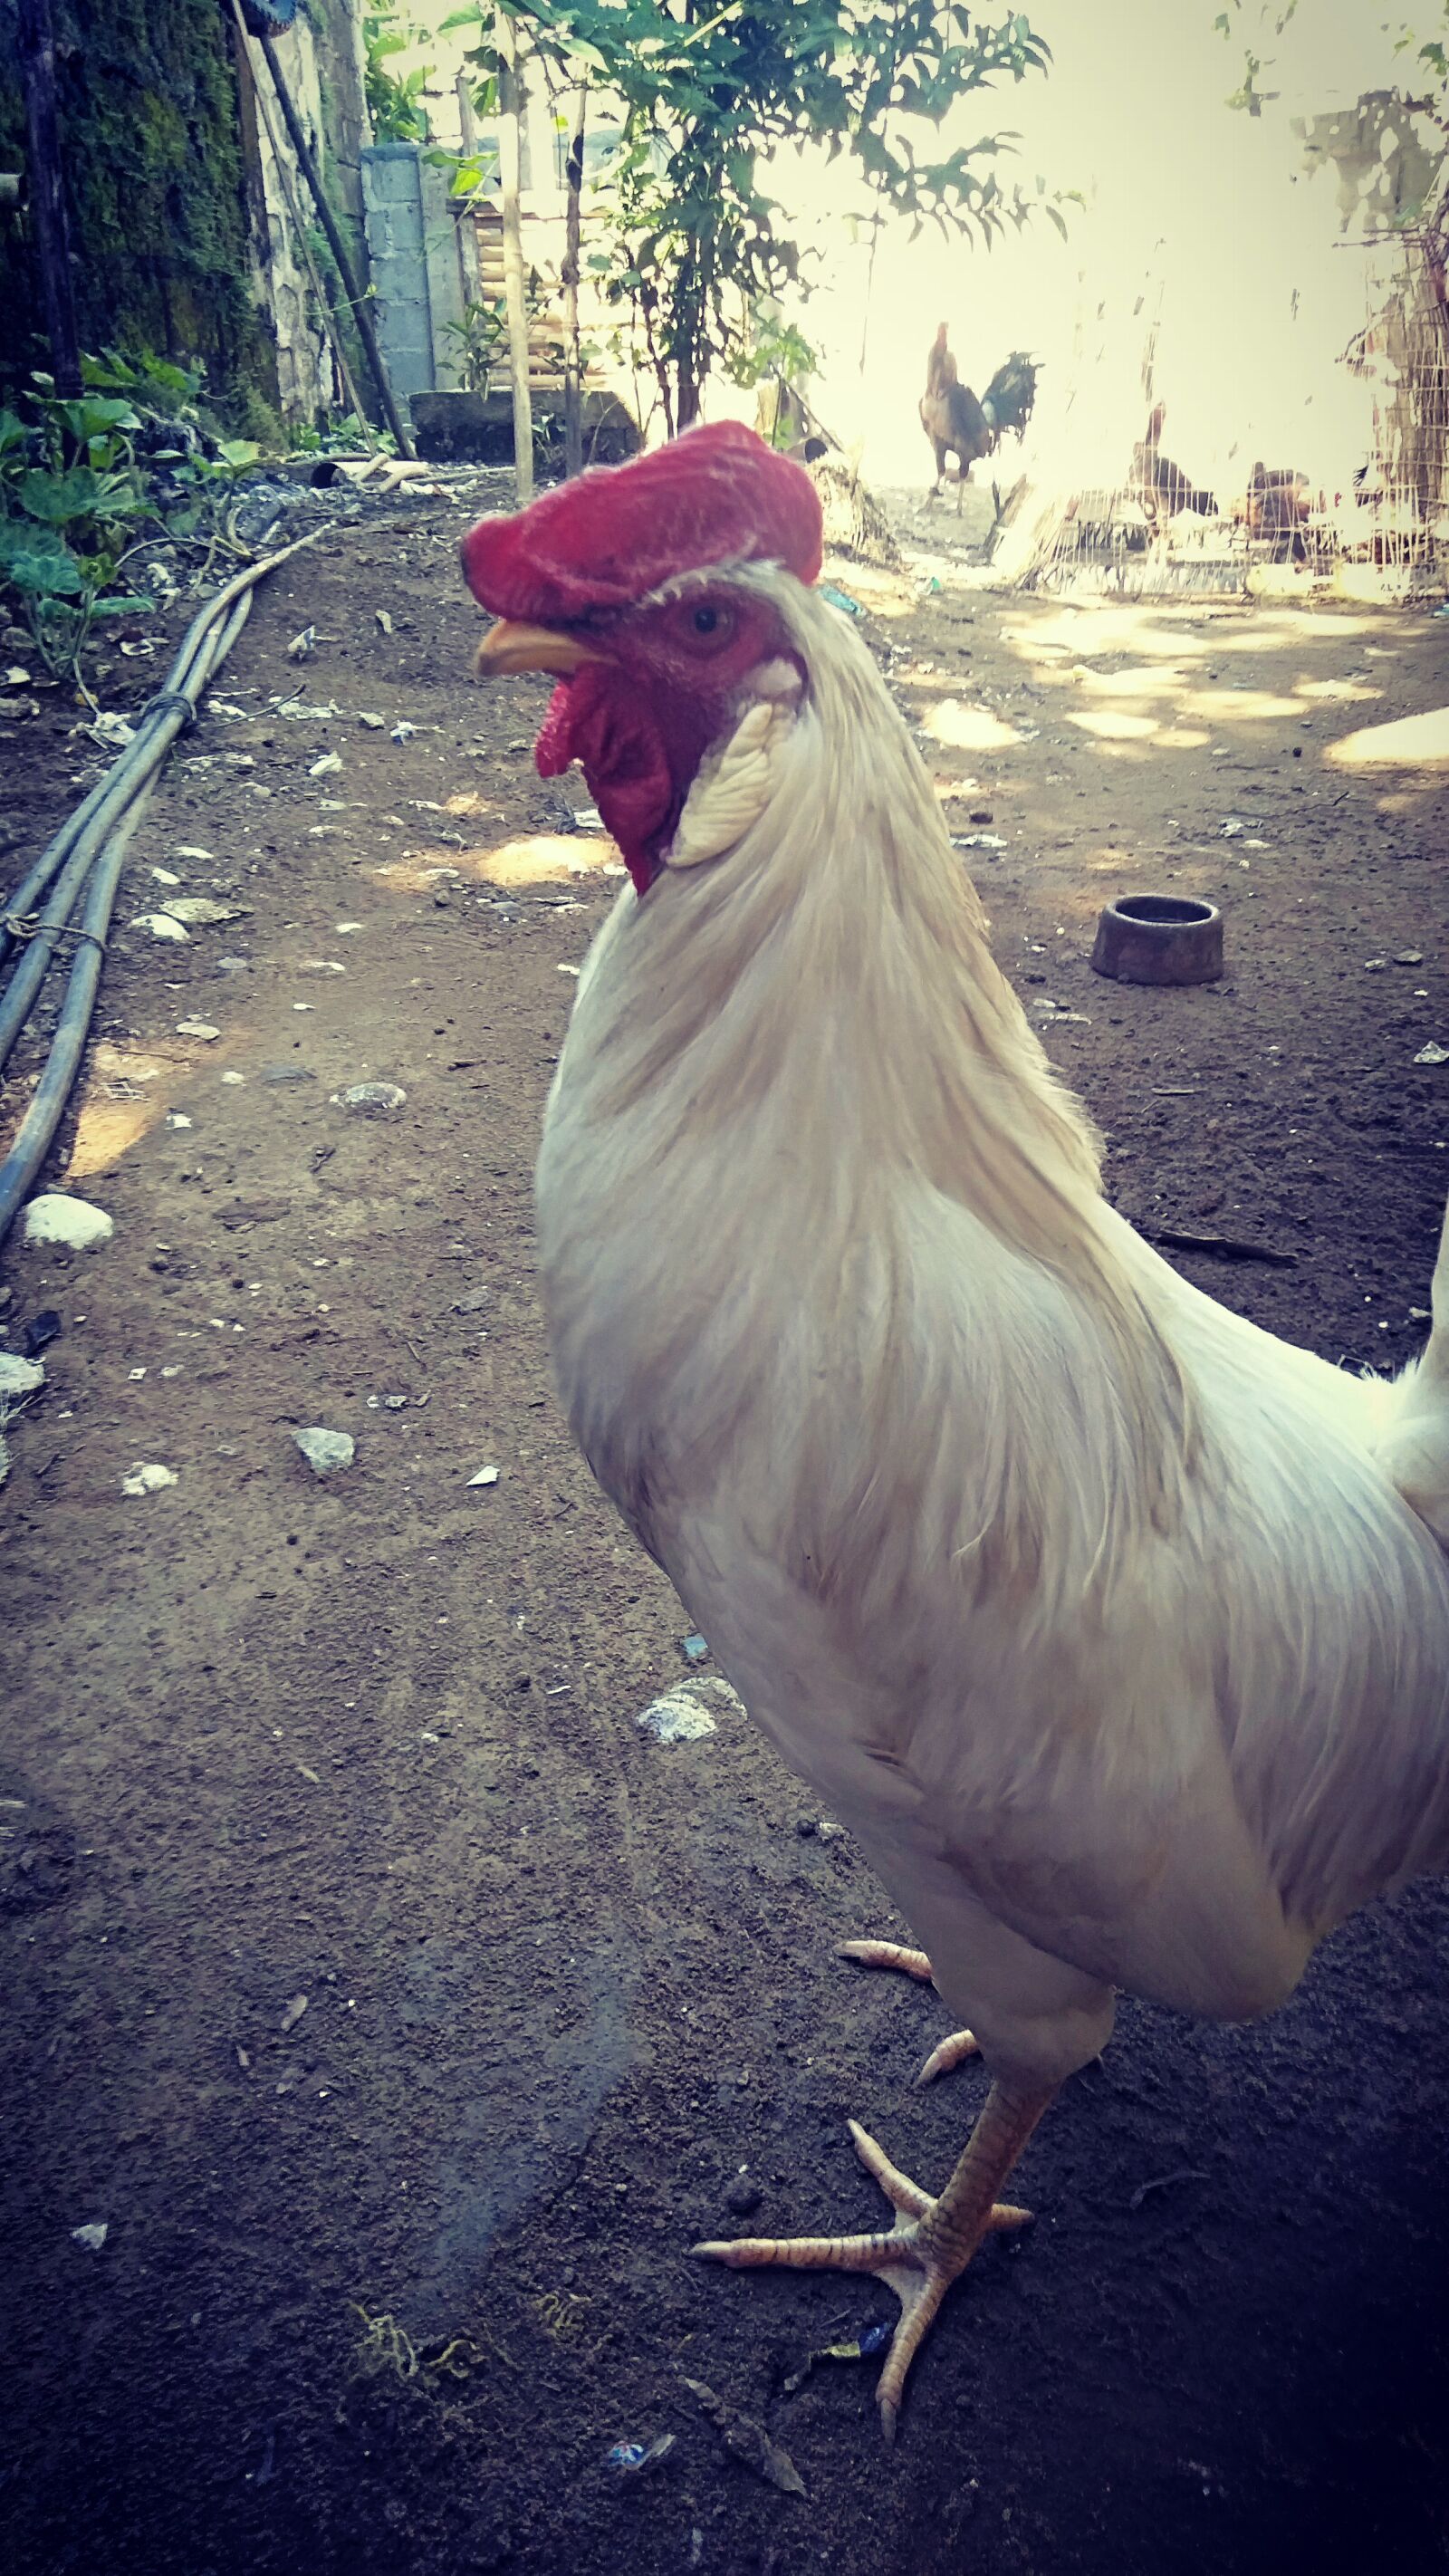 OPPO CPH1801 sample photo. Rooster, chicken, animal photography